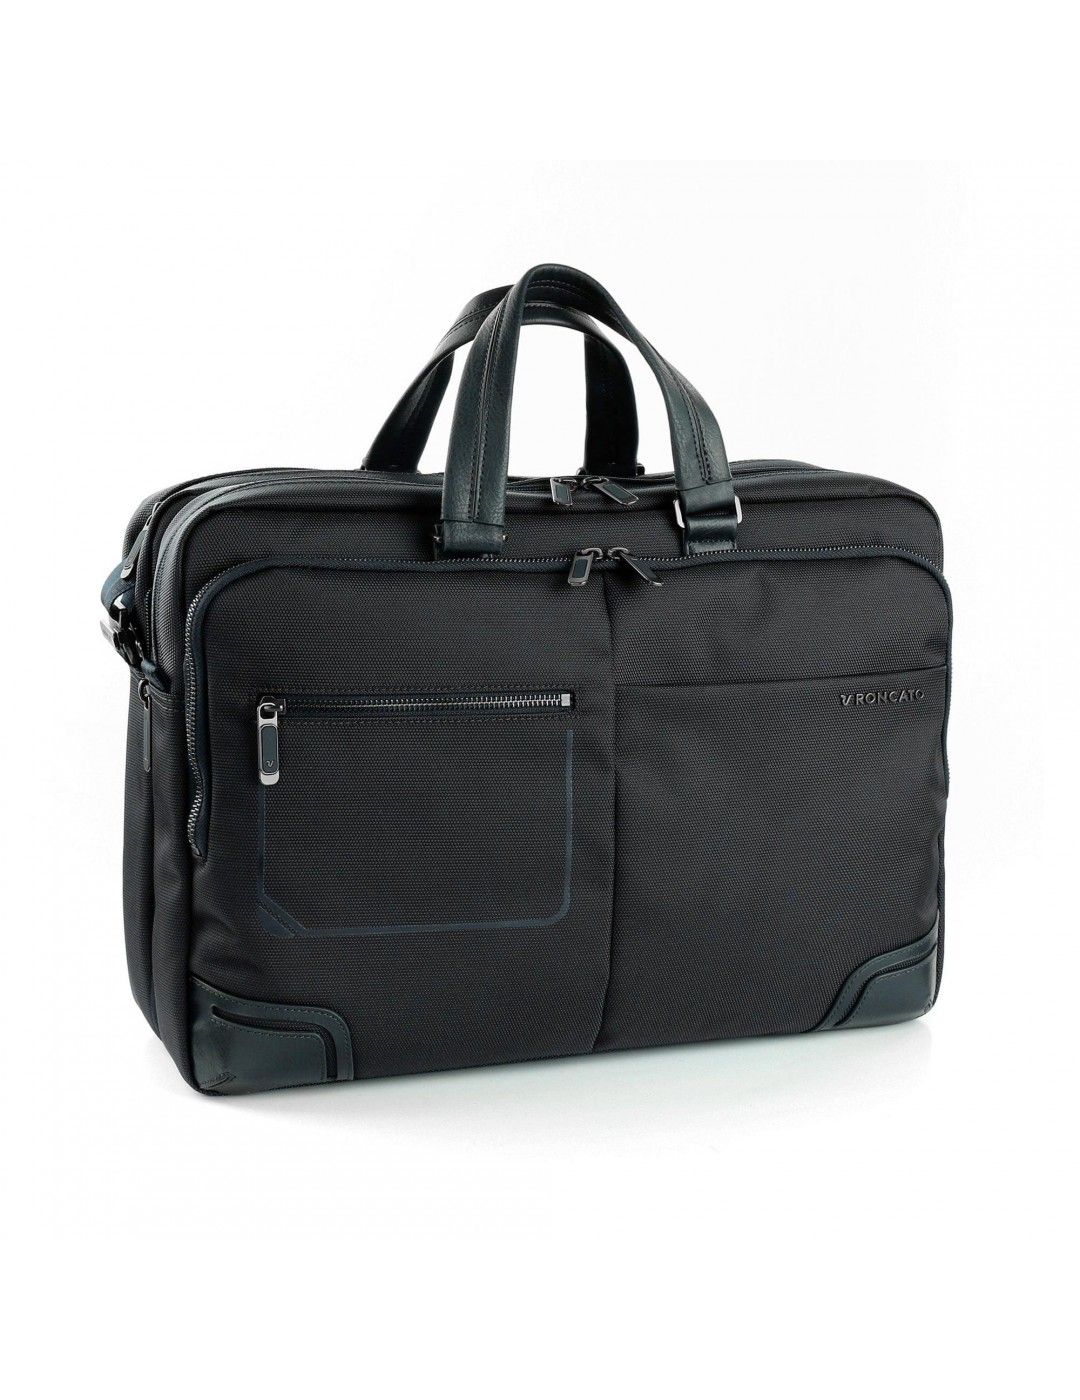 Laptop bag Roncato 15.6 inches Wall Street